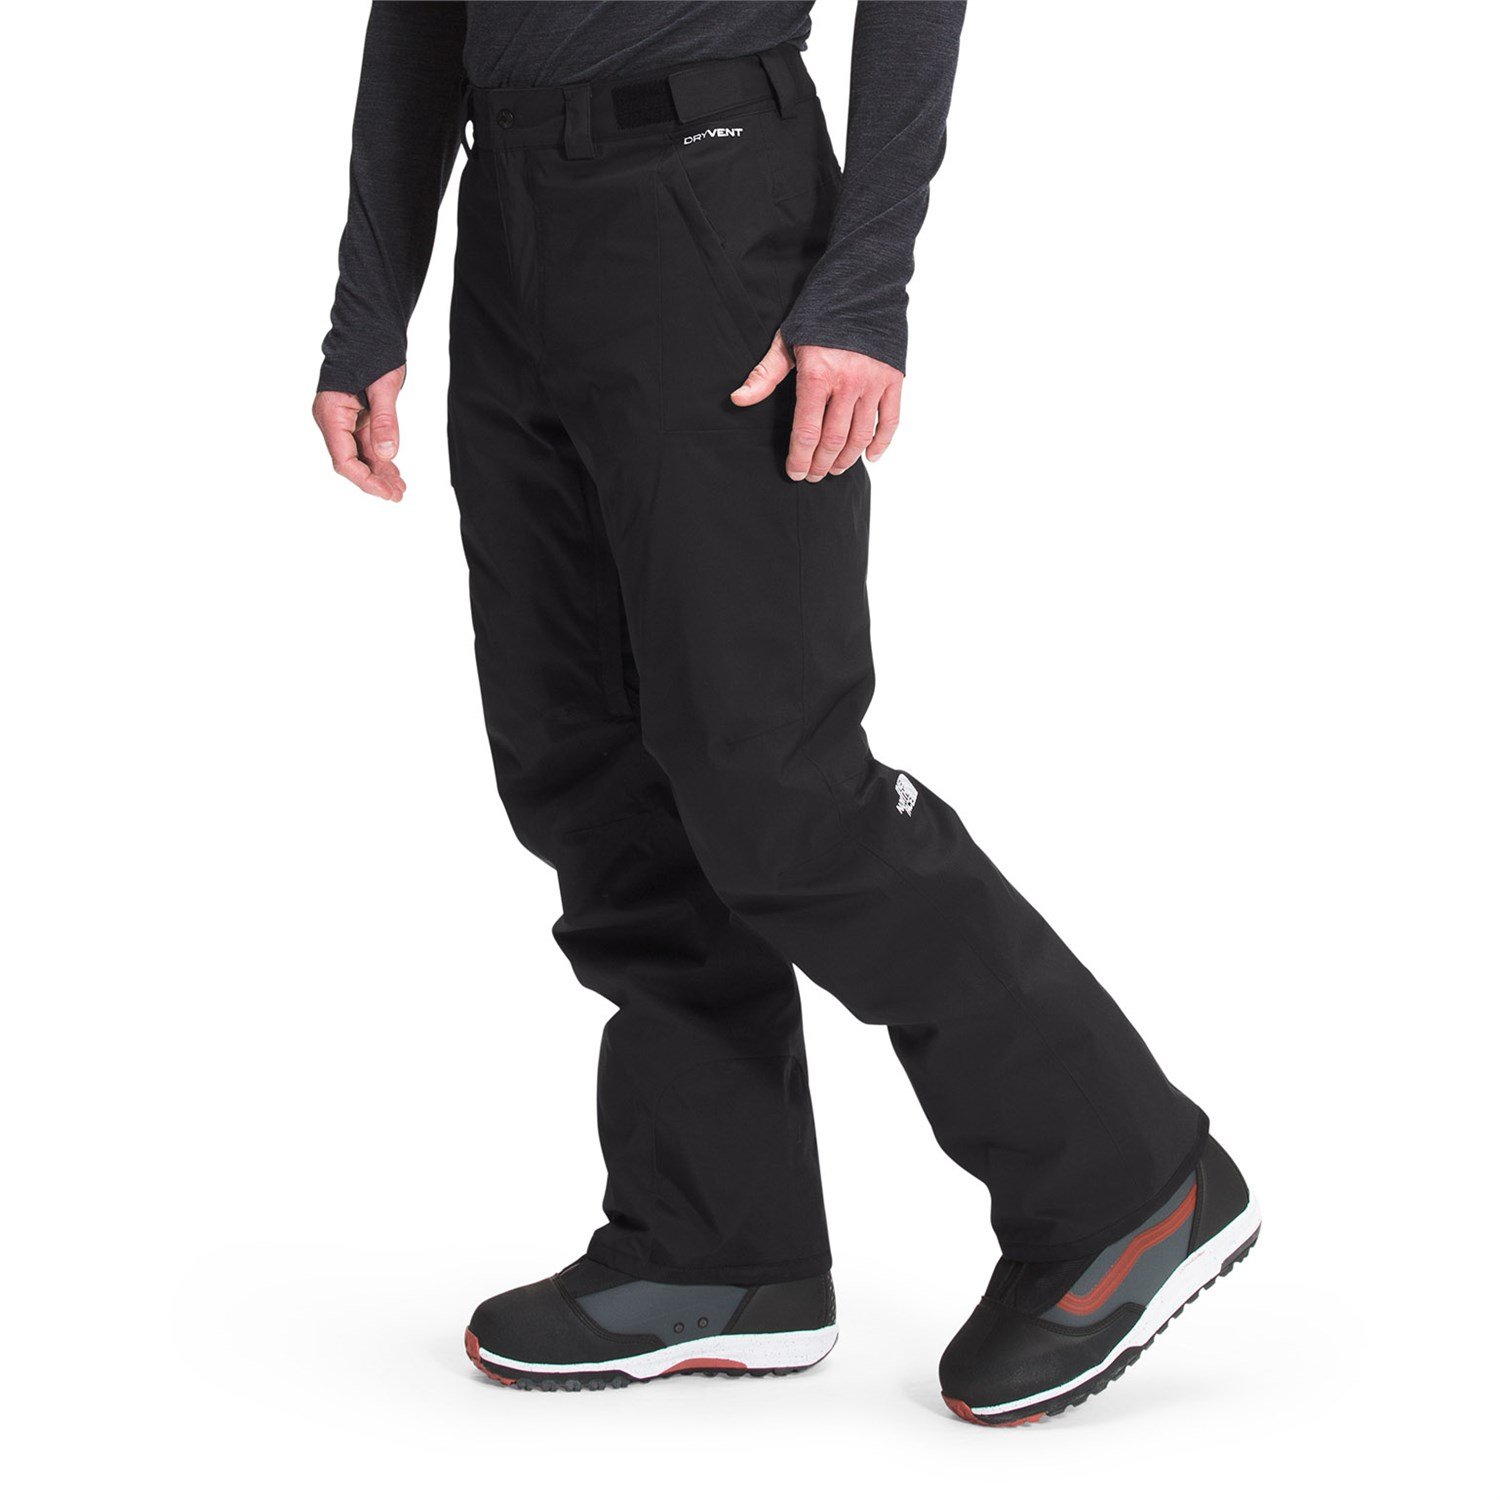  THE NORTH FACE Men's Freedom Stretch Pant - Short, TNF Black,  Small Short : Clothing, Shoes & Jewelry